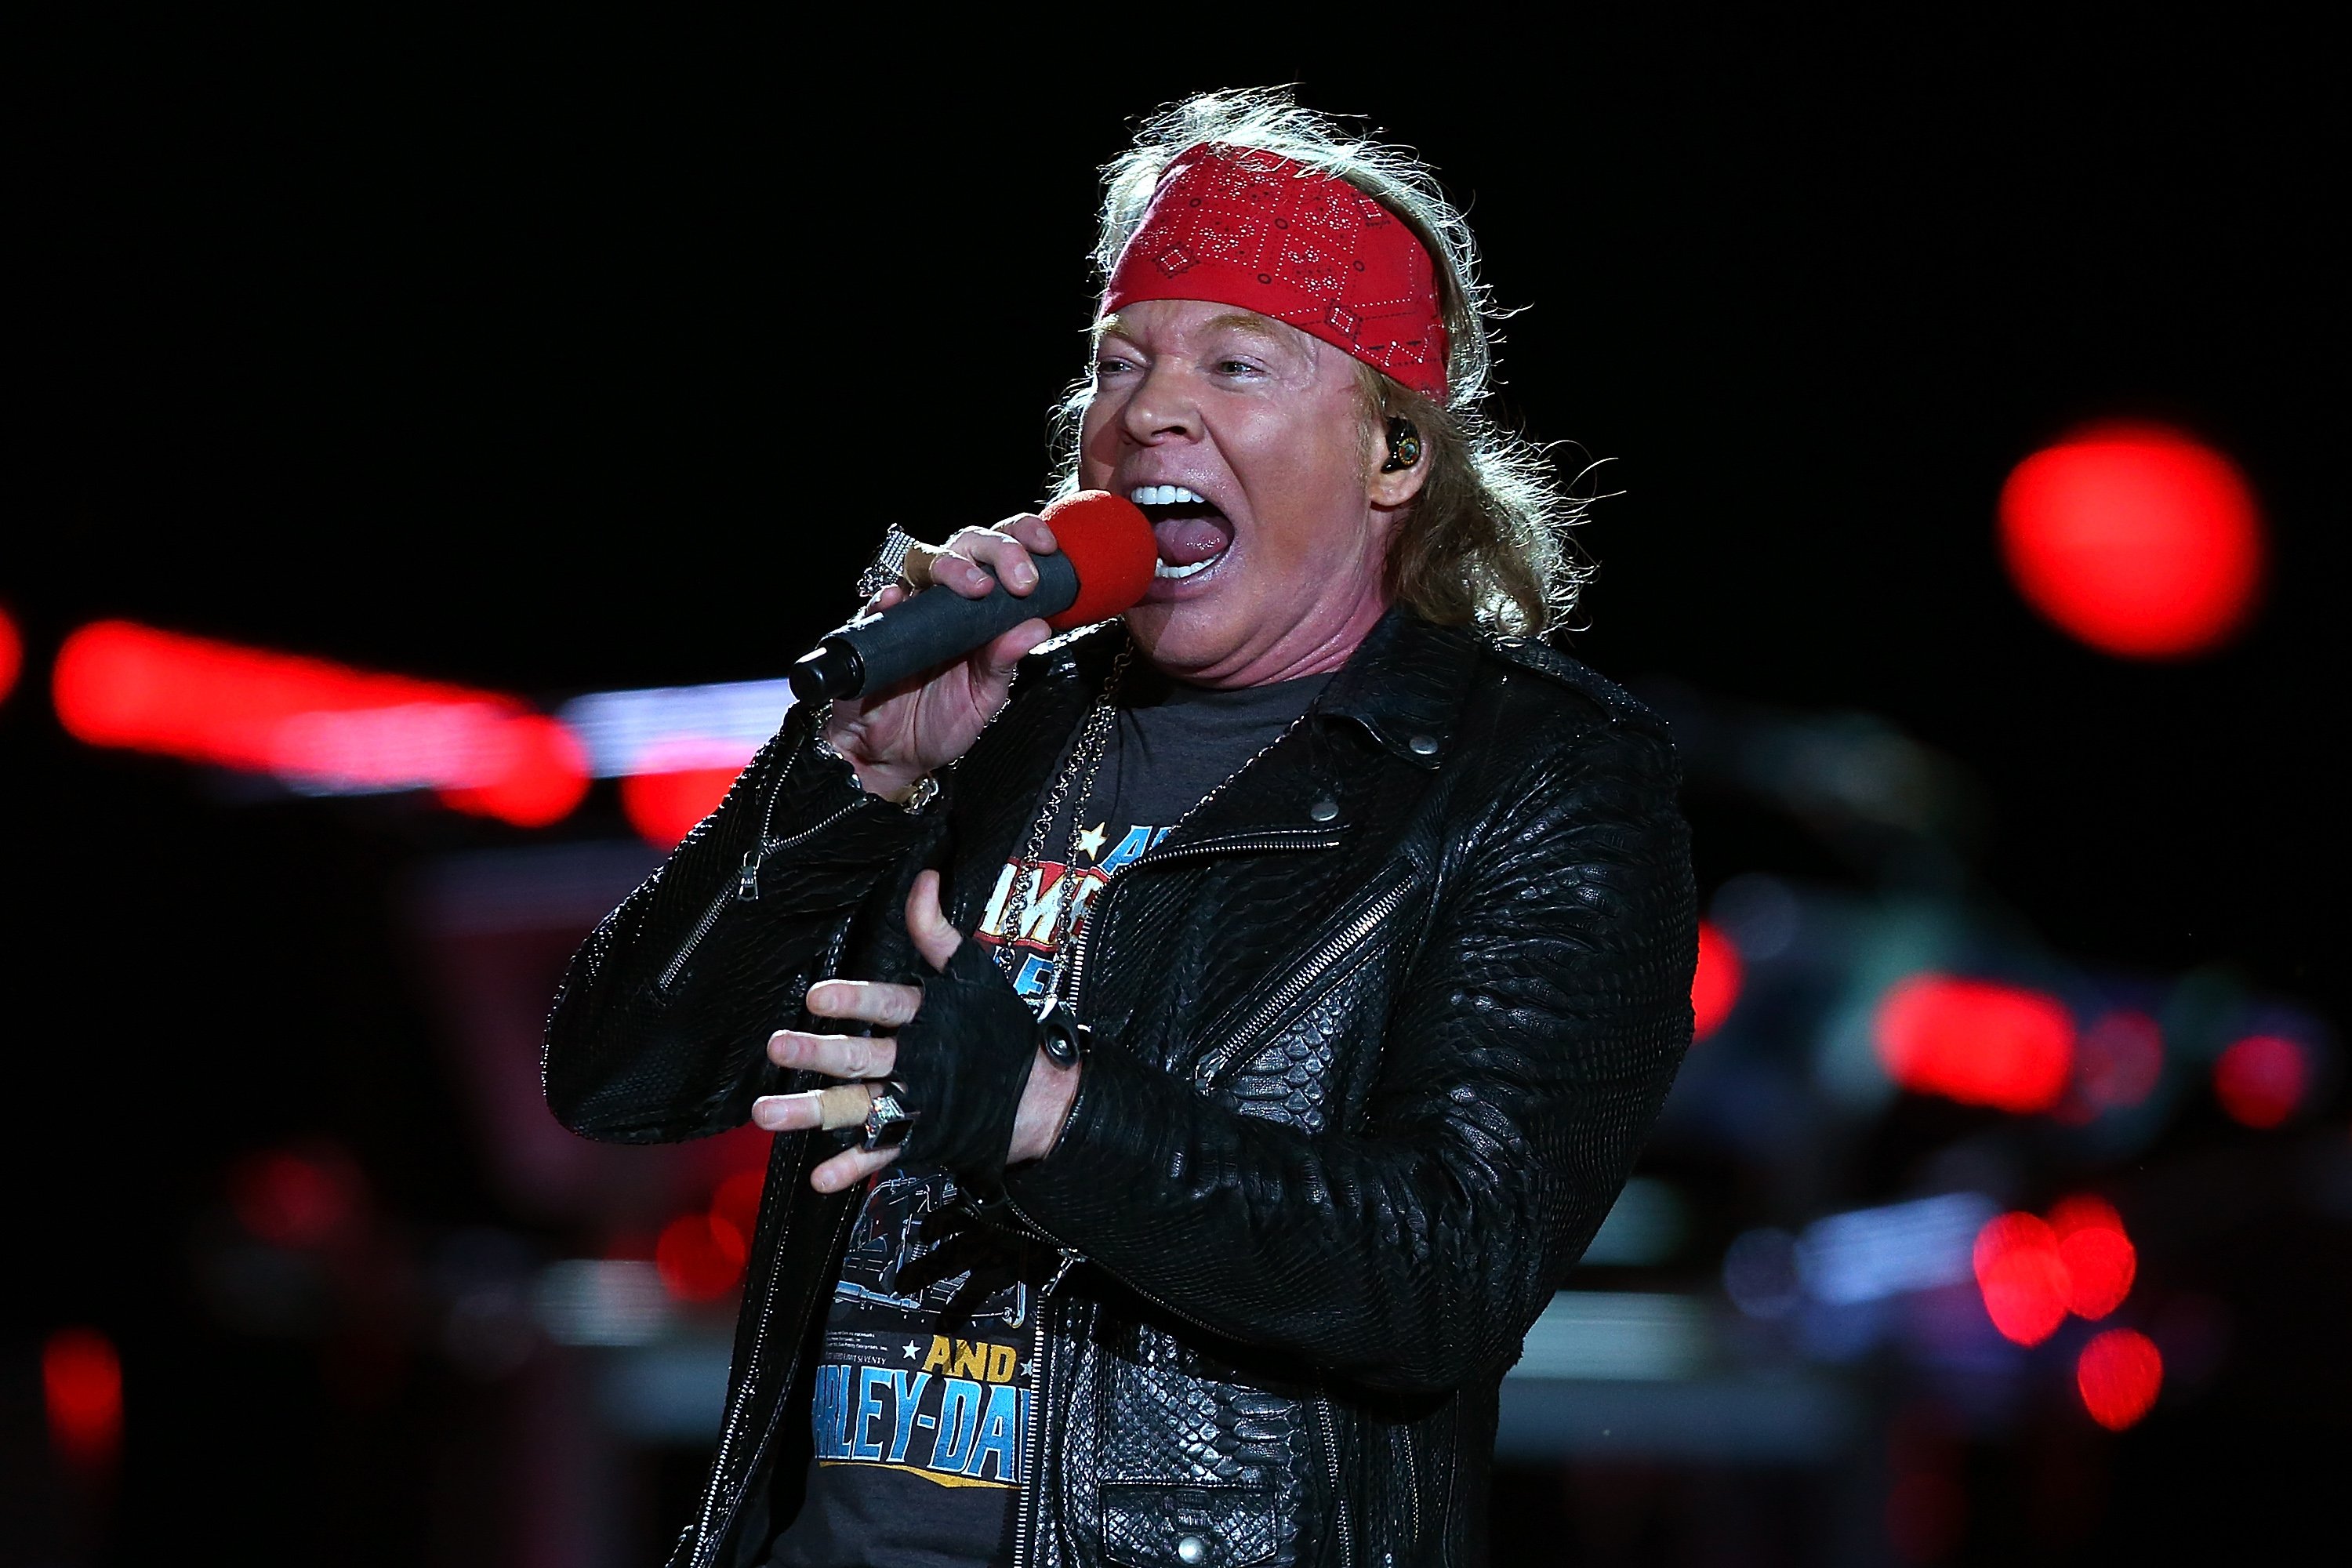 Axl Rose perfoms on stage during the Guns N' Roses 'Not In This Lifetime' Tour at Domain Stadium on February 21, 2017, in Perth, Australia. | Source: Getty Images